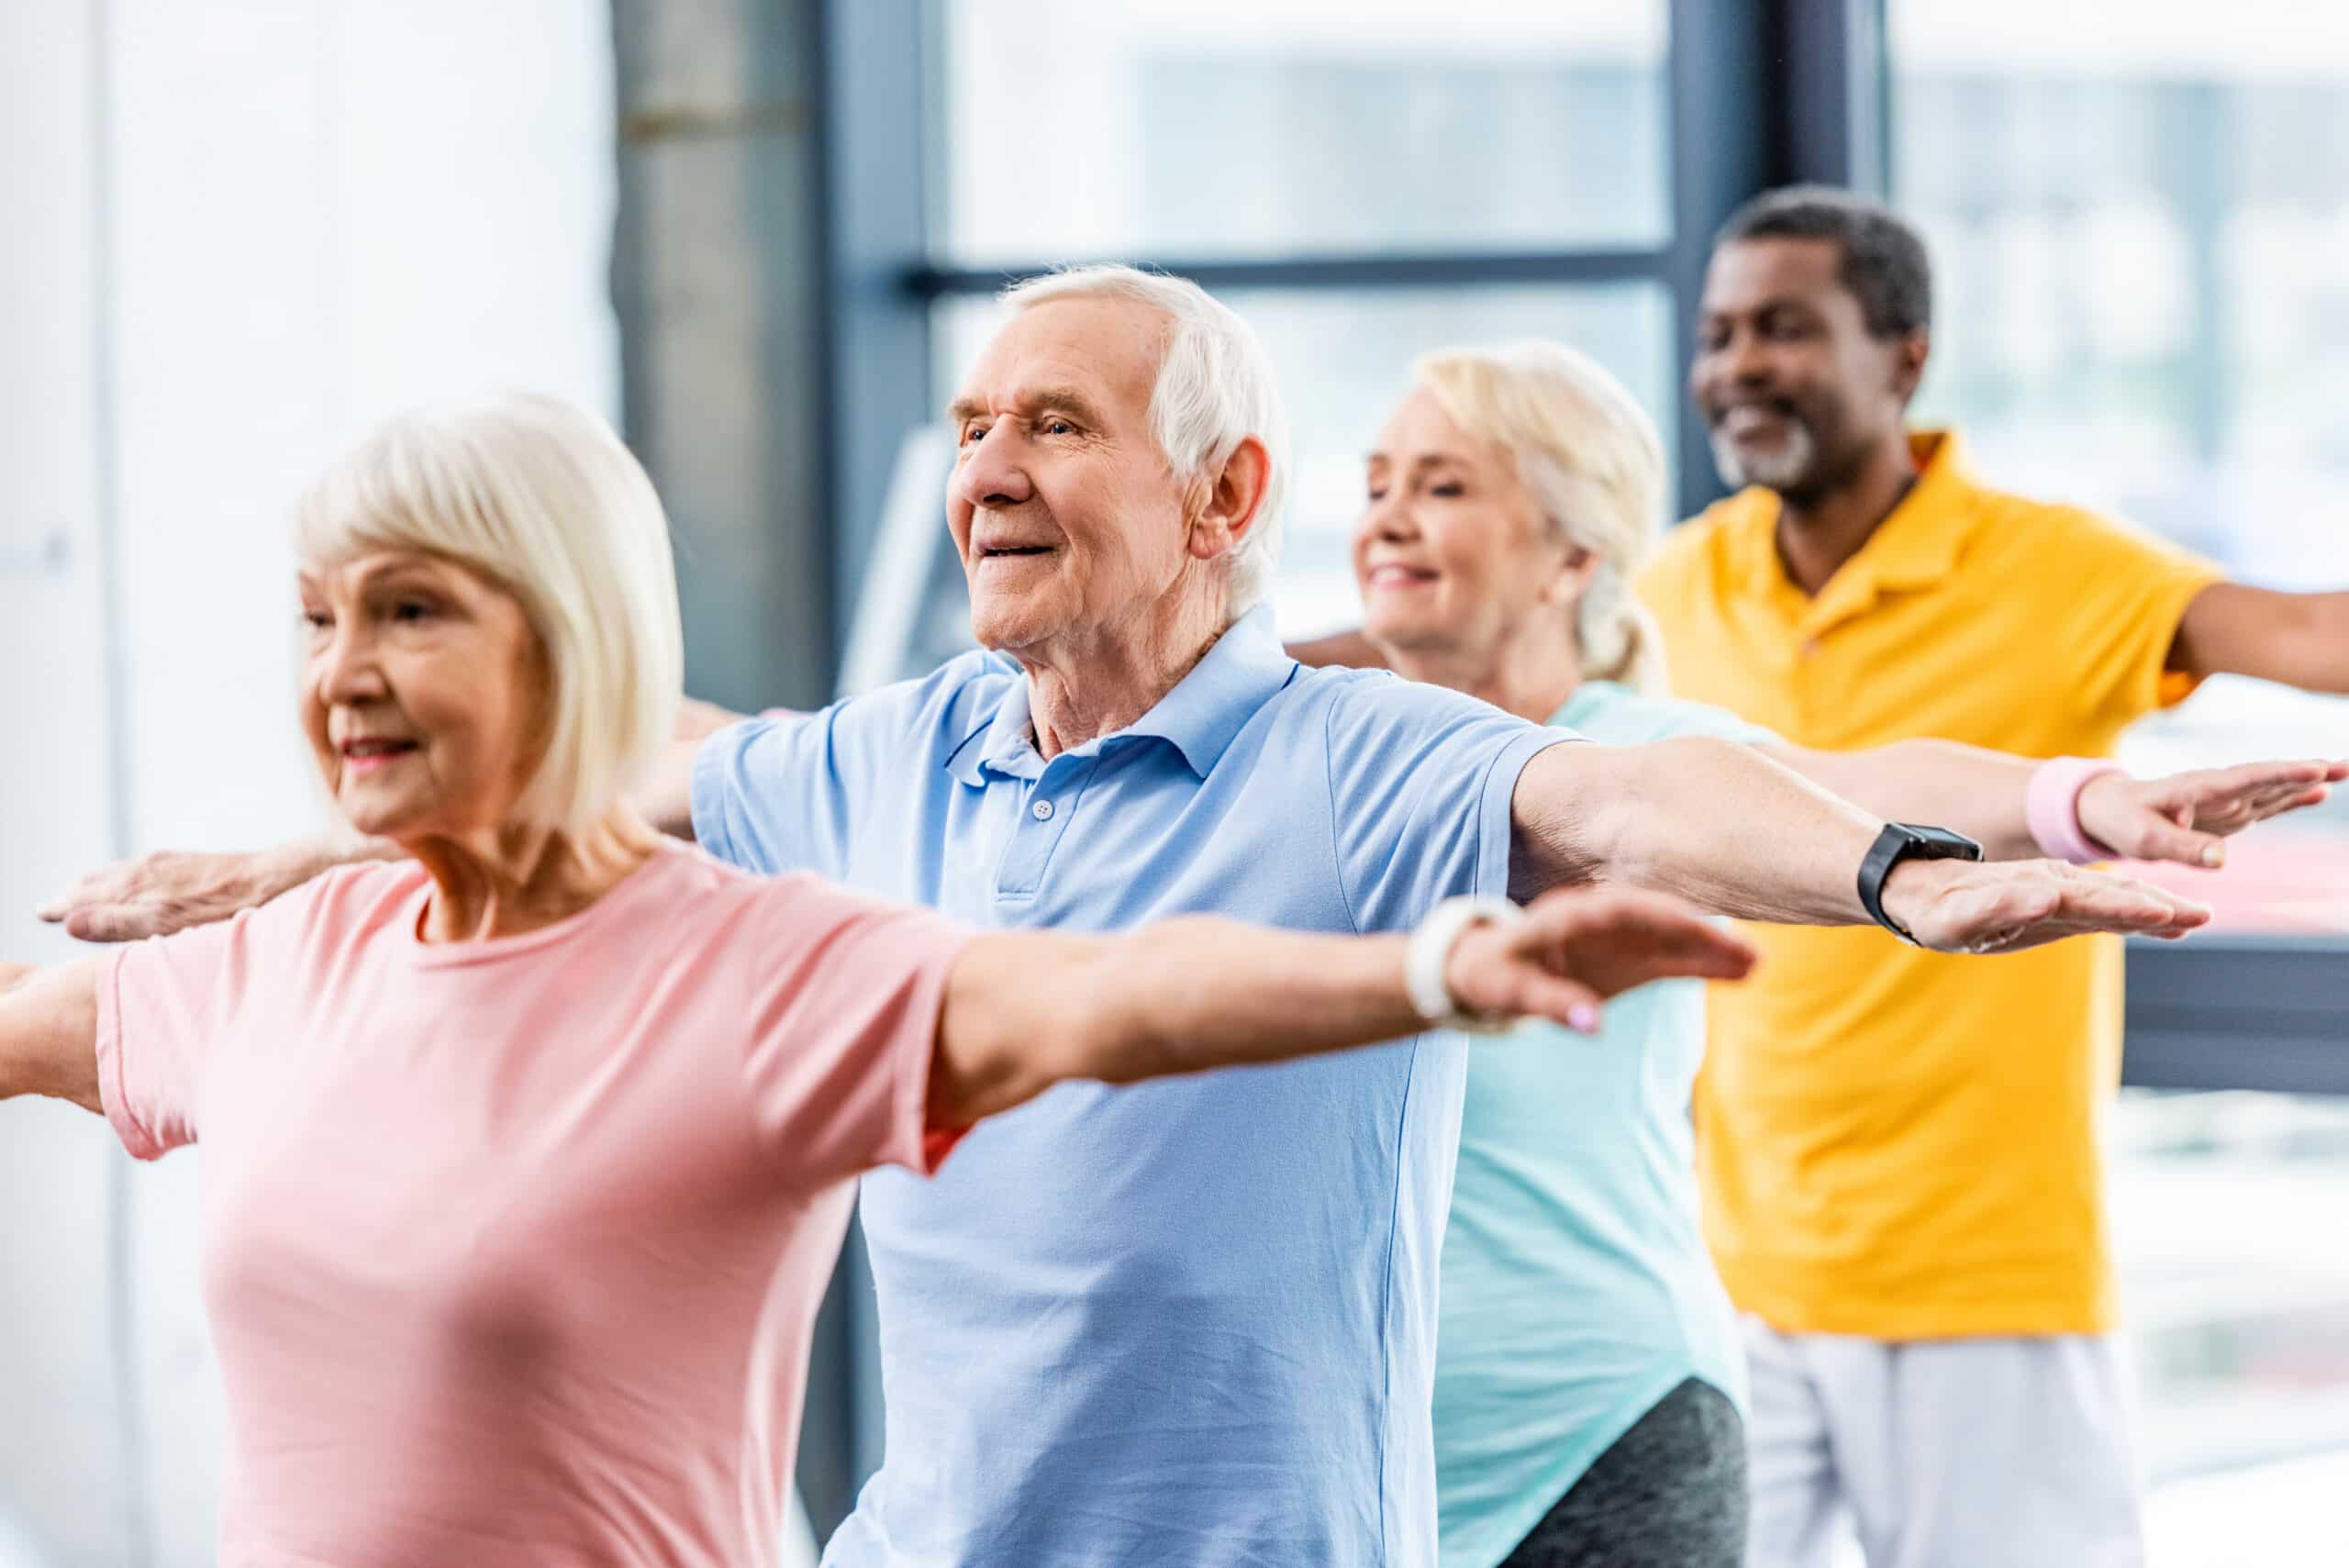 A group of happy seniors stretching their arms in a fitness class. They are standing in a line with arms extended, smiling, and wearing colorful workout clothes.